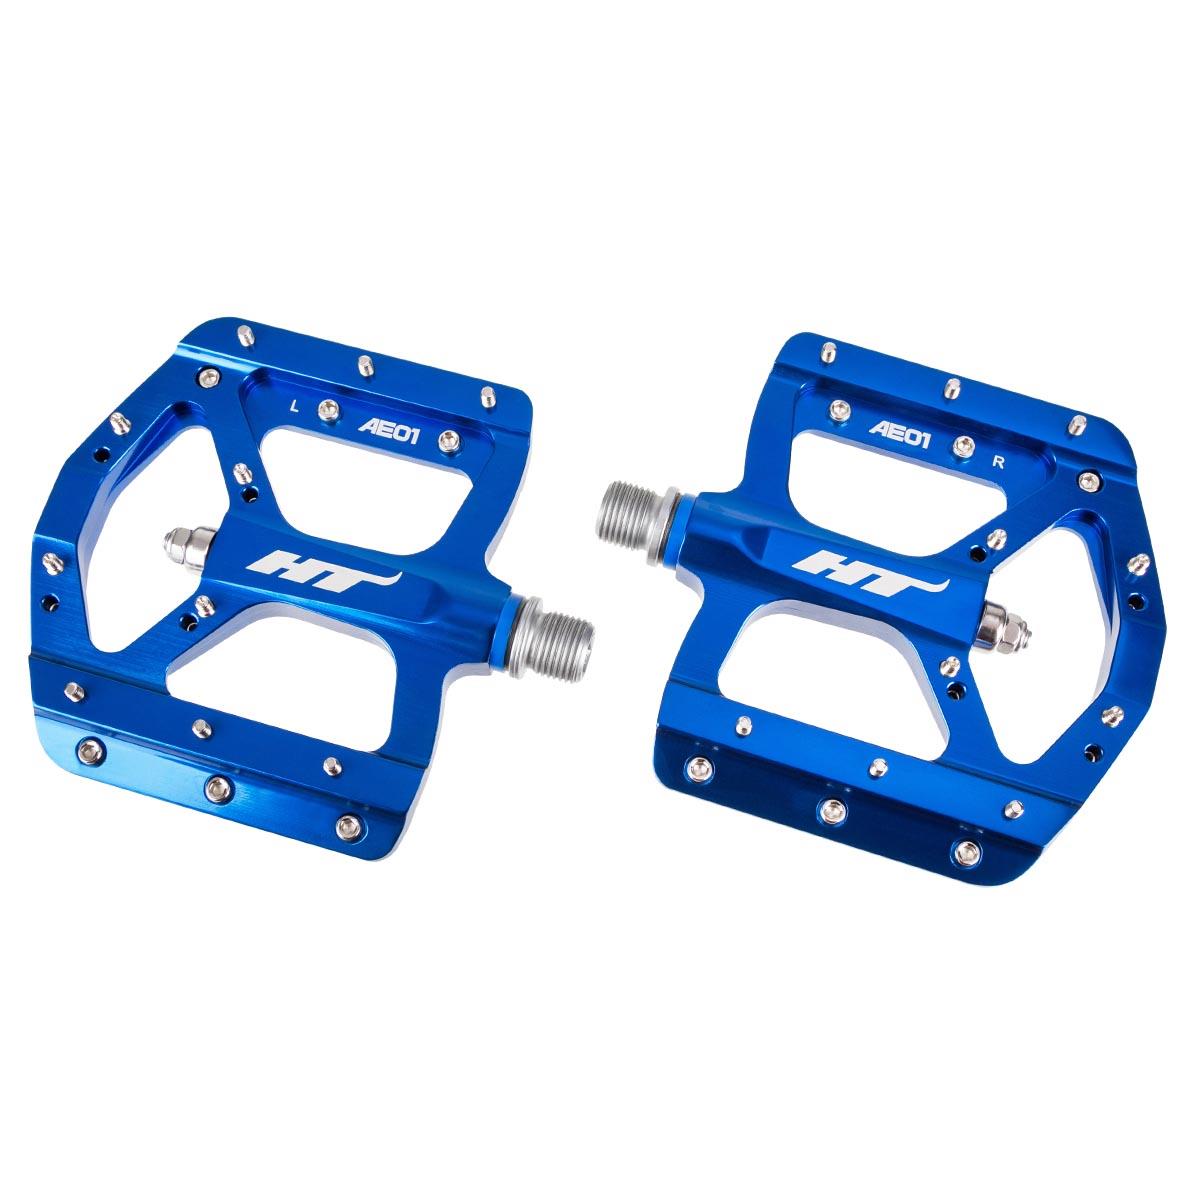 HT Components Pedals AE01 One Size